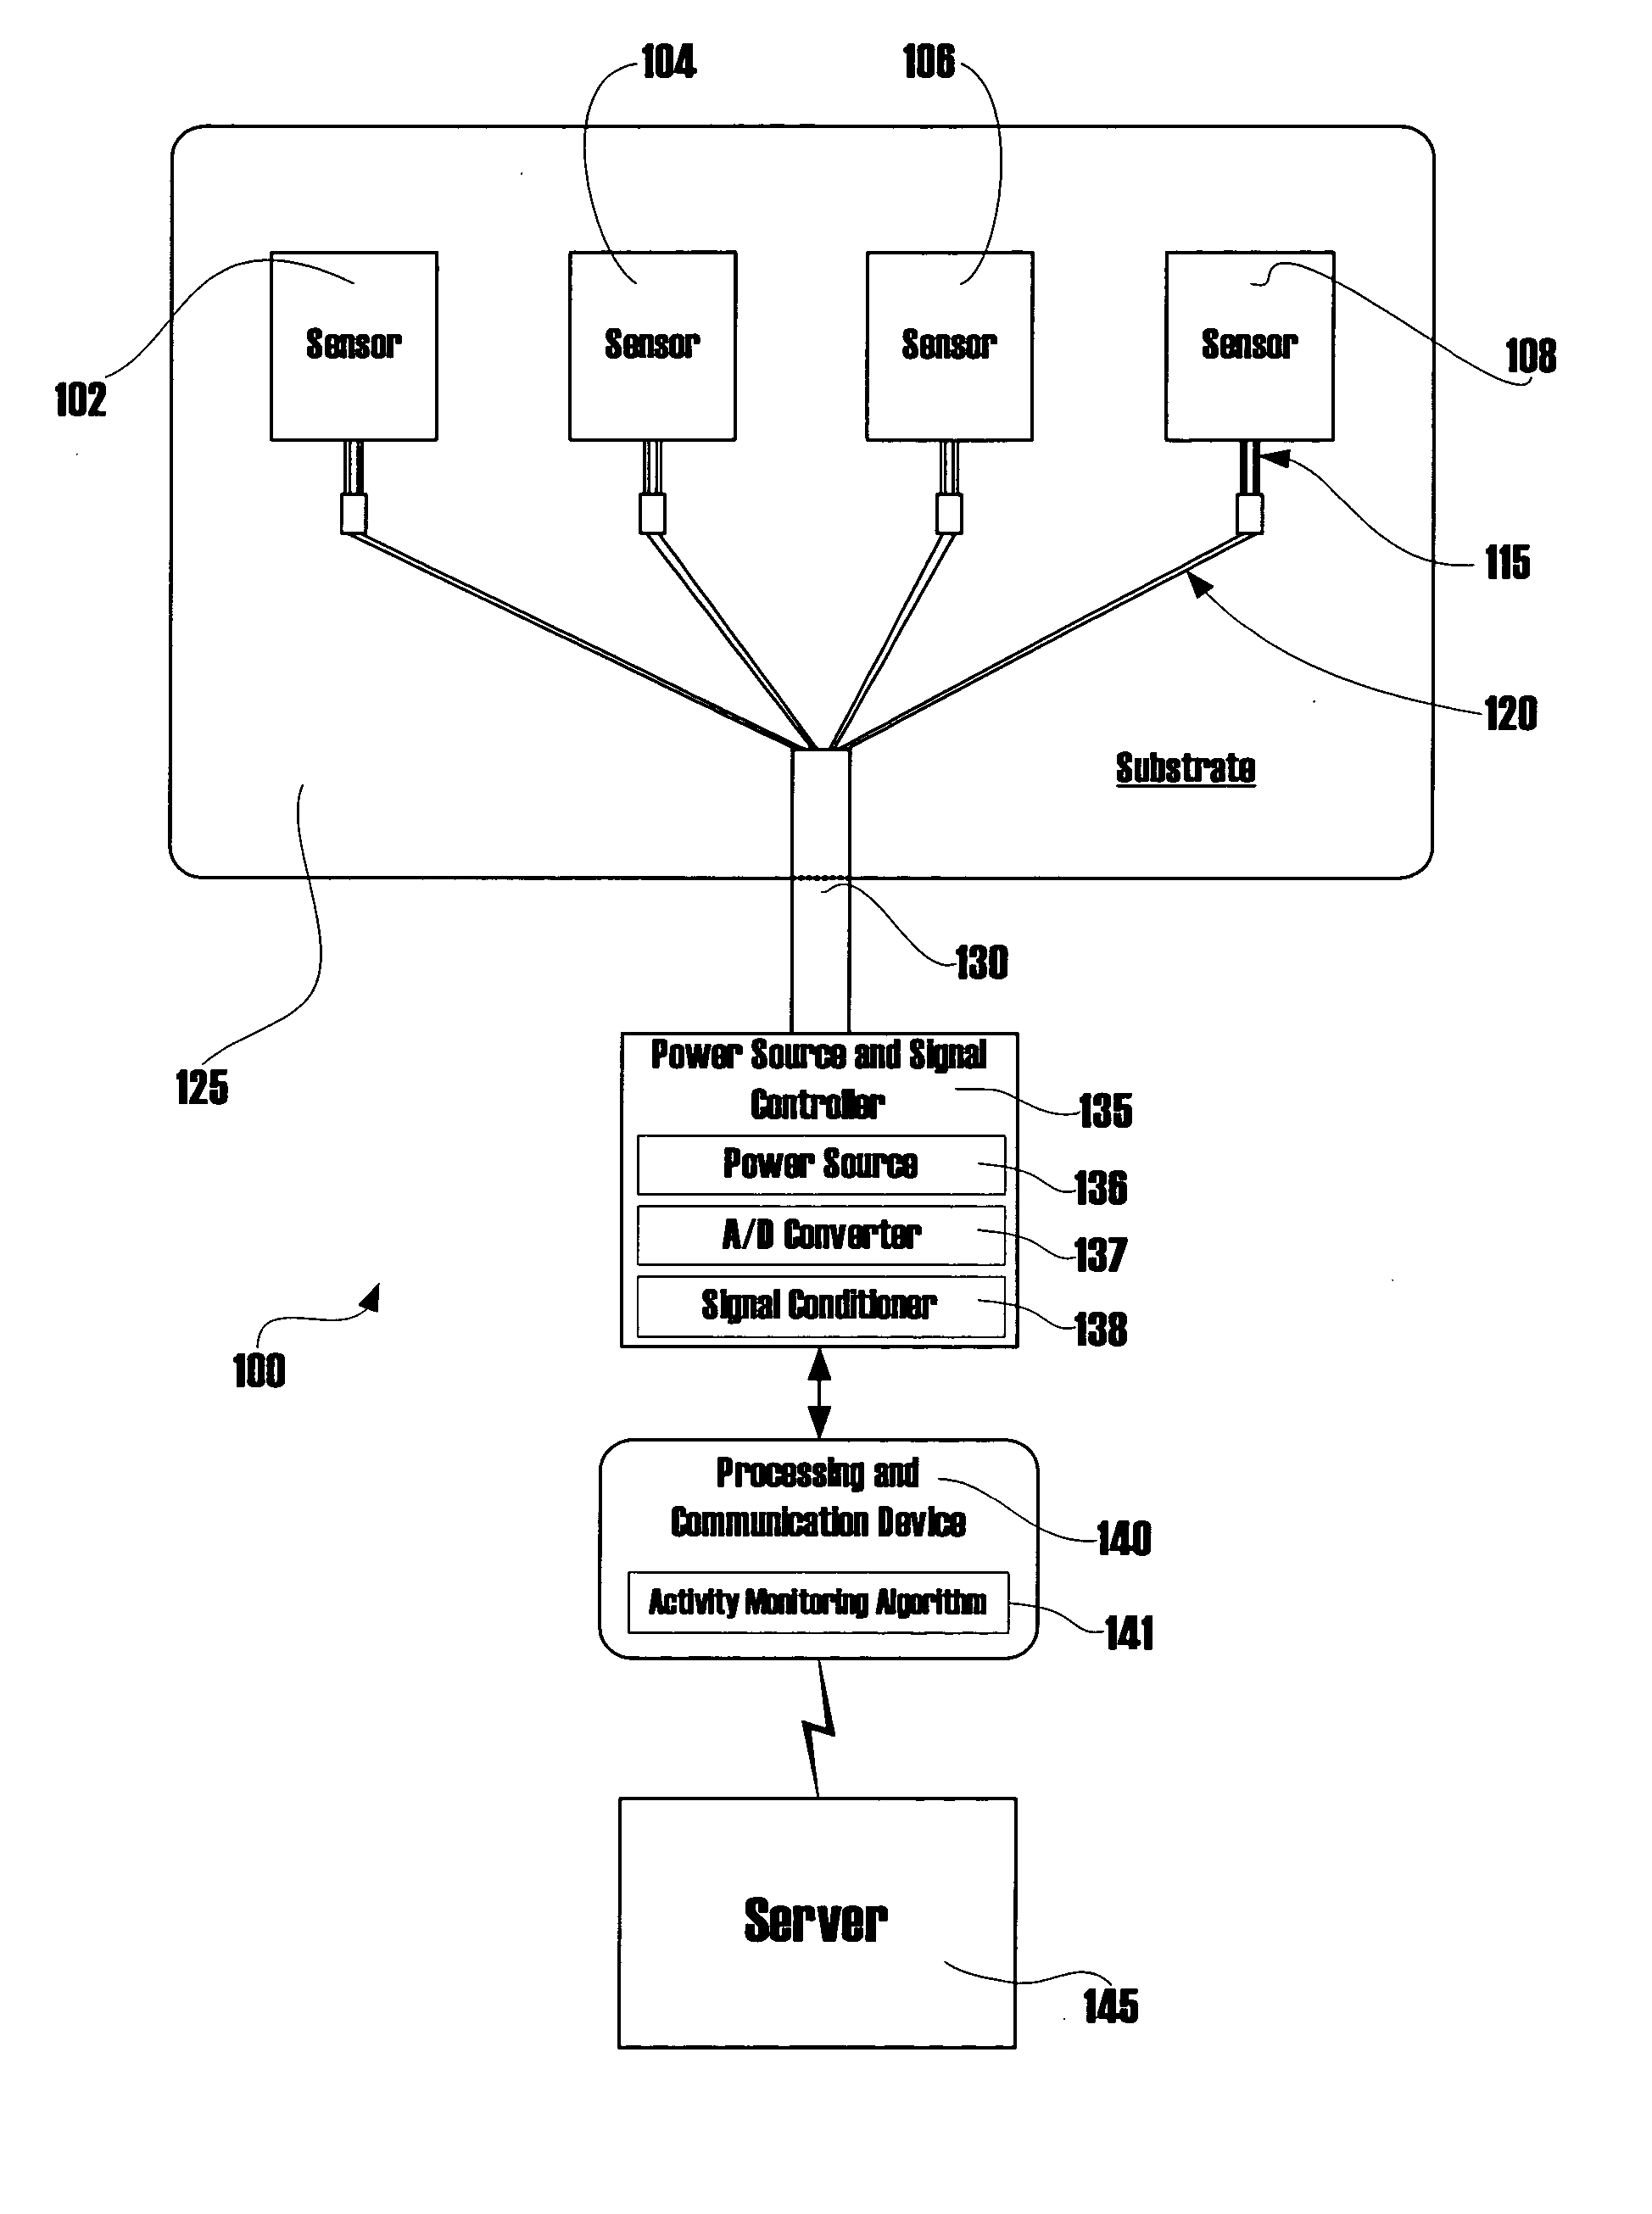 Systems and methods for mobile activity monitoring